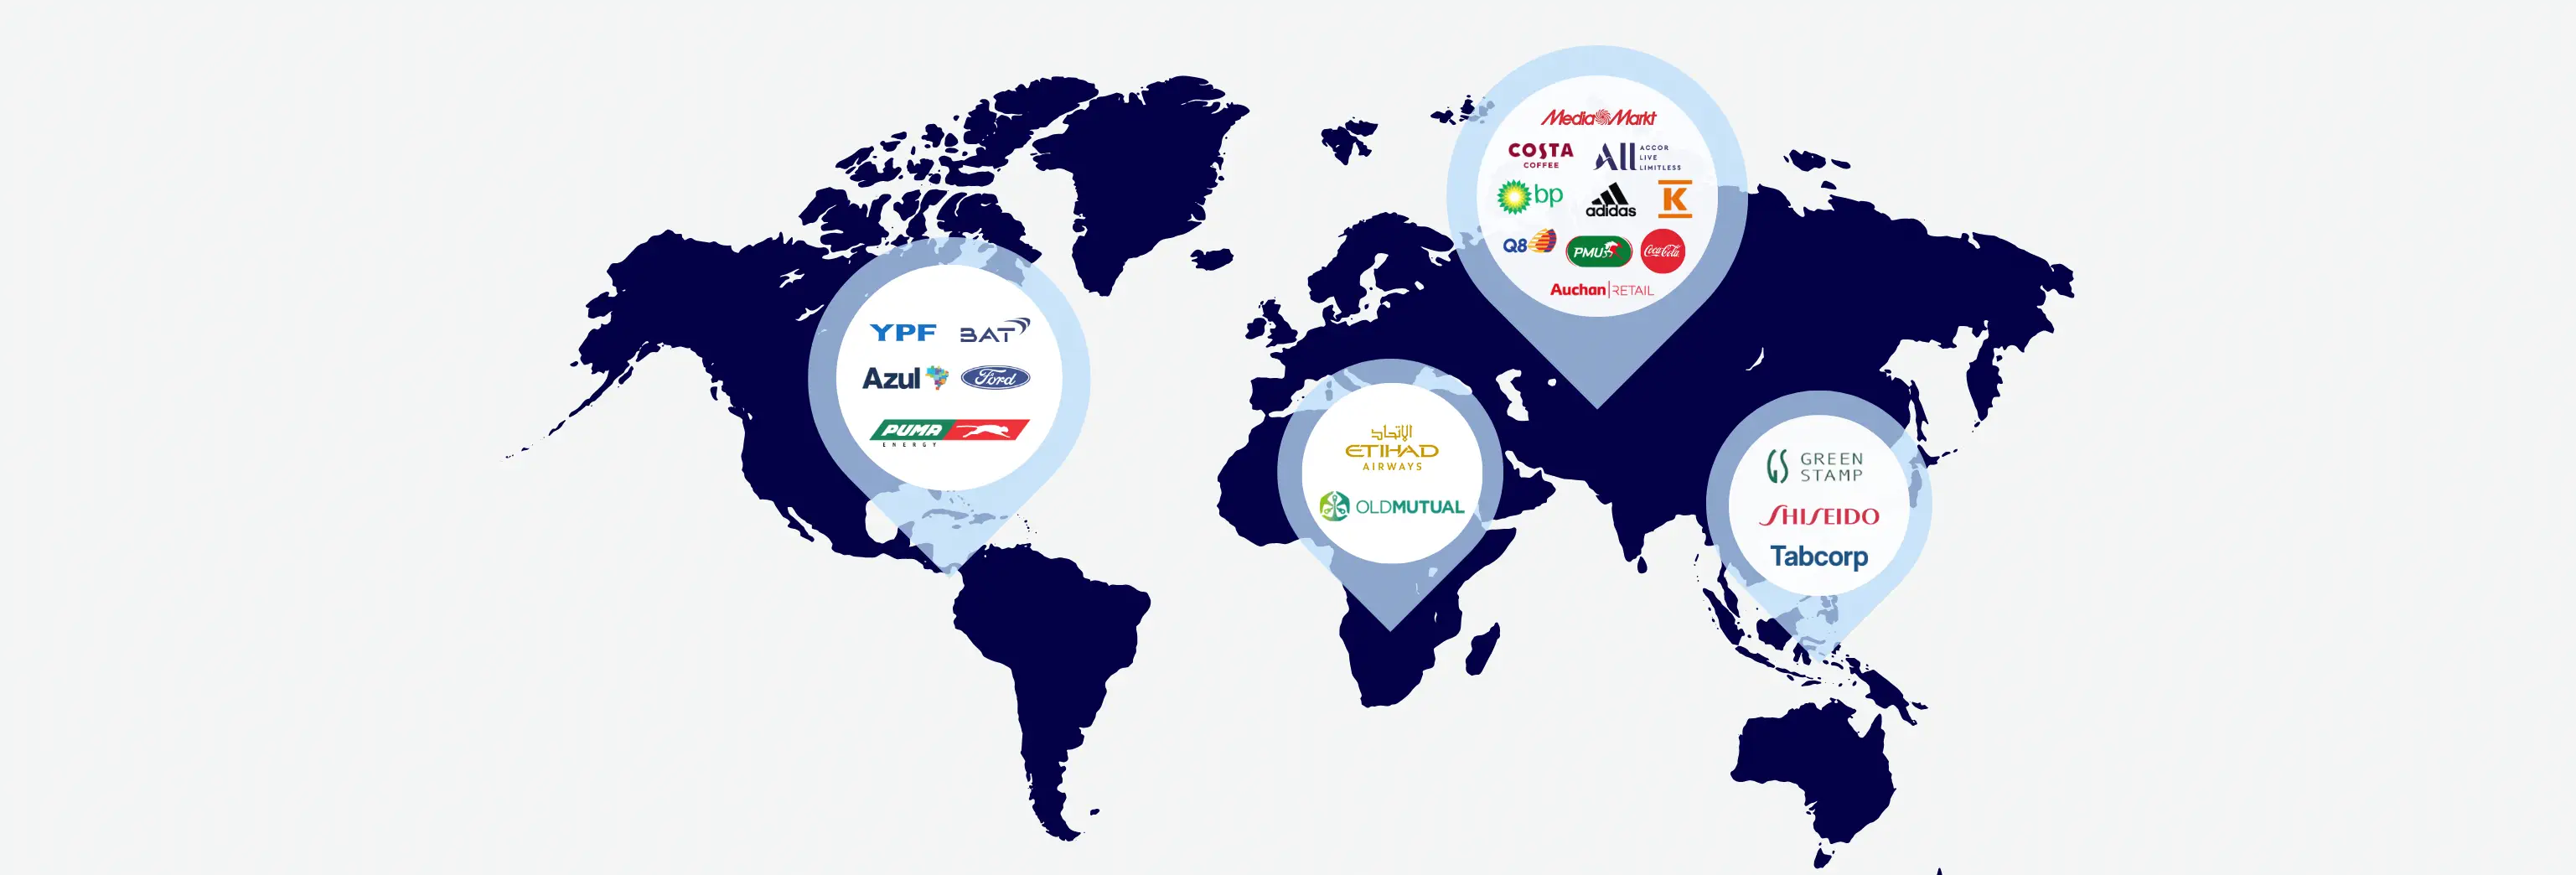 Image with a map of world with logos of clients we worked with